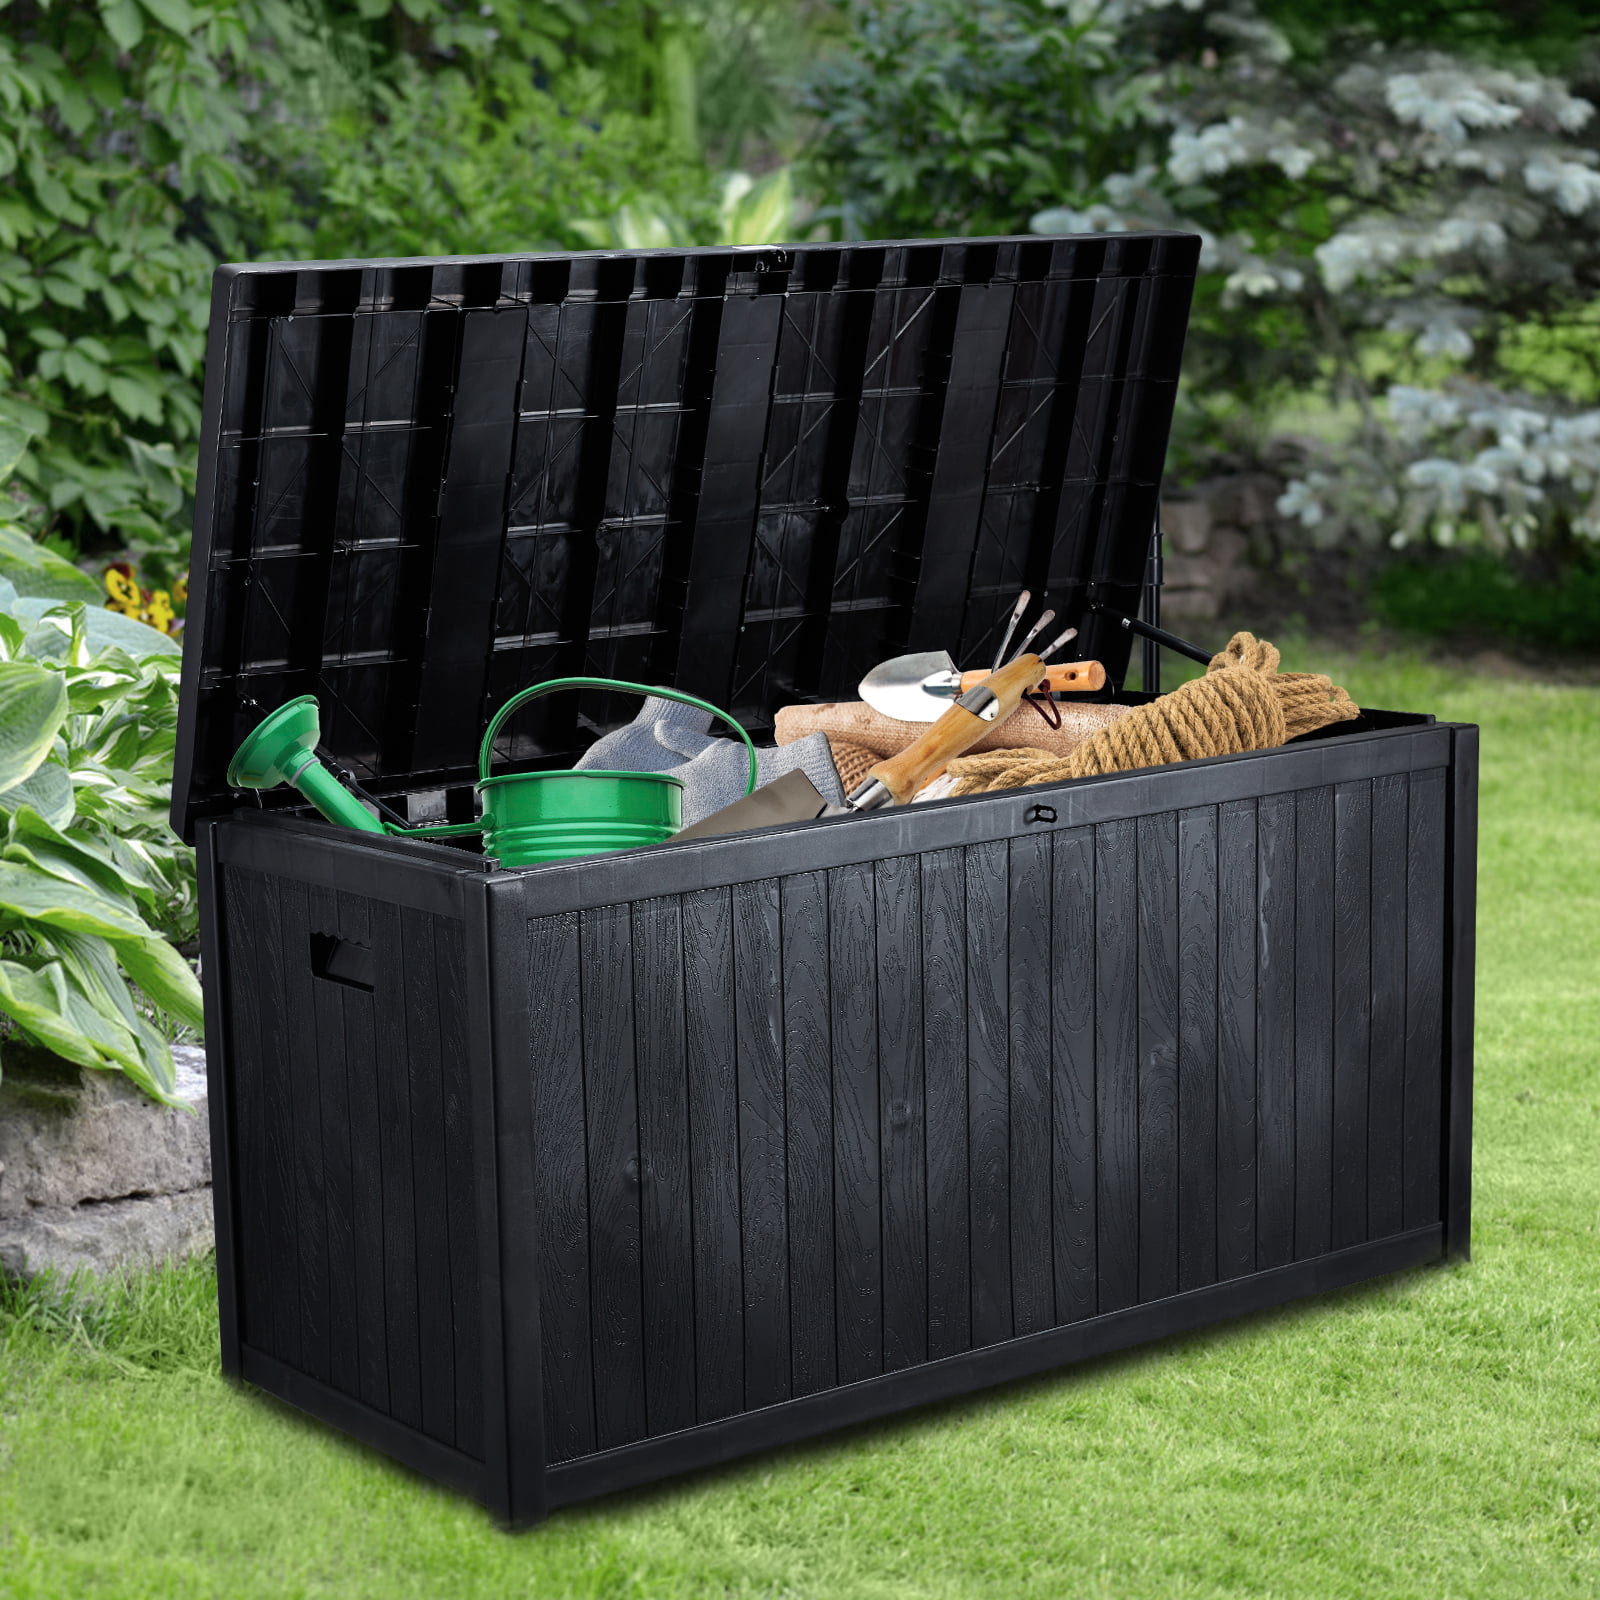 Pool Toys AVAWING Large Deck Box Brown Pillows Outdoor Storage Container with 120 Gallon Patio Garden Furniture for Garden Tools 